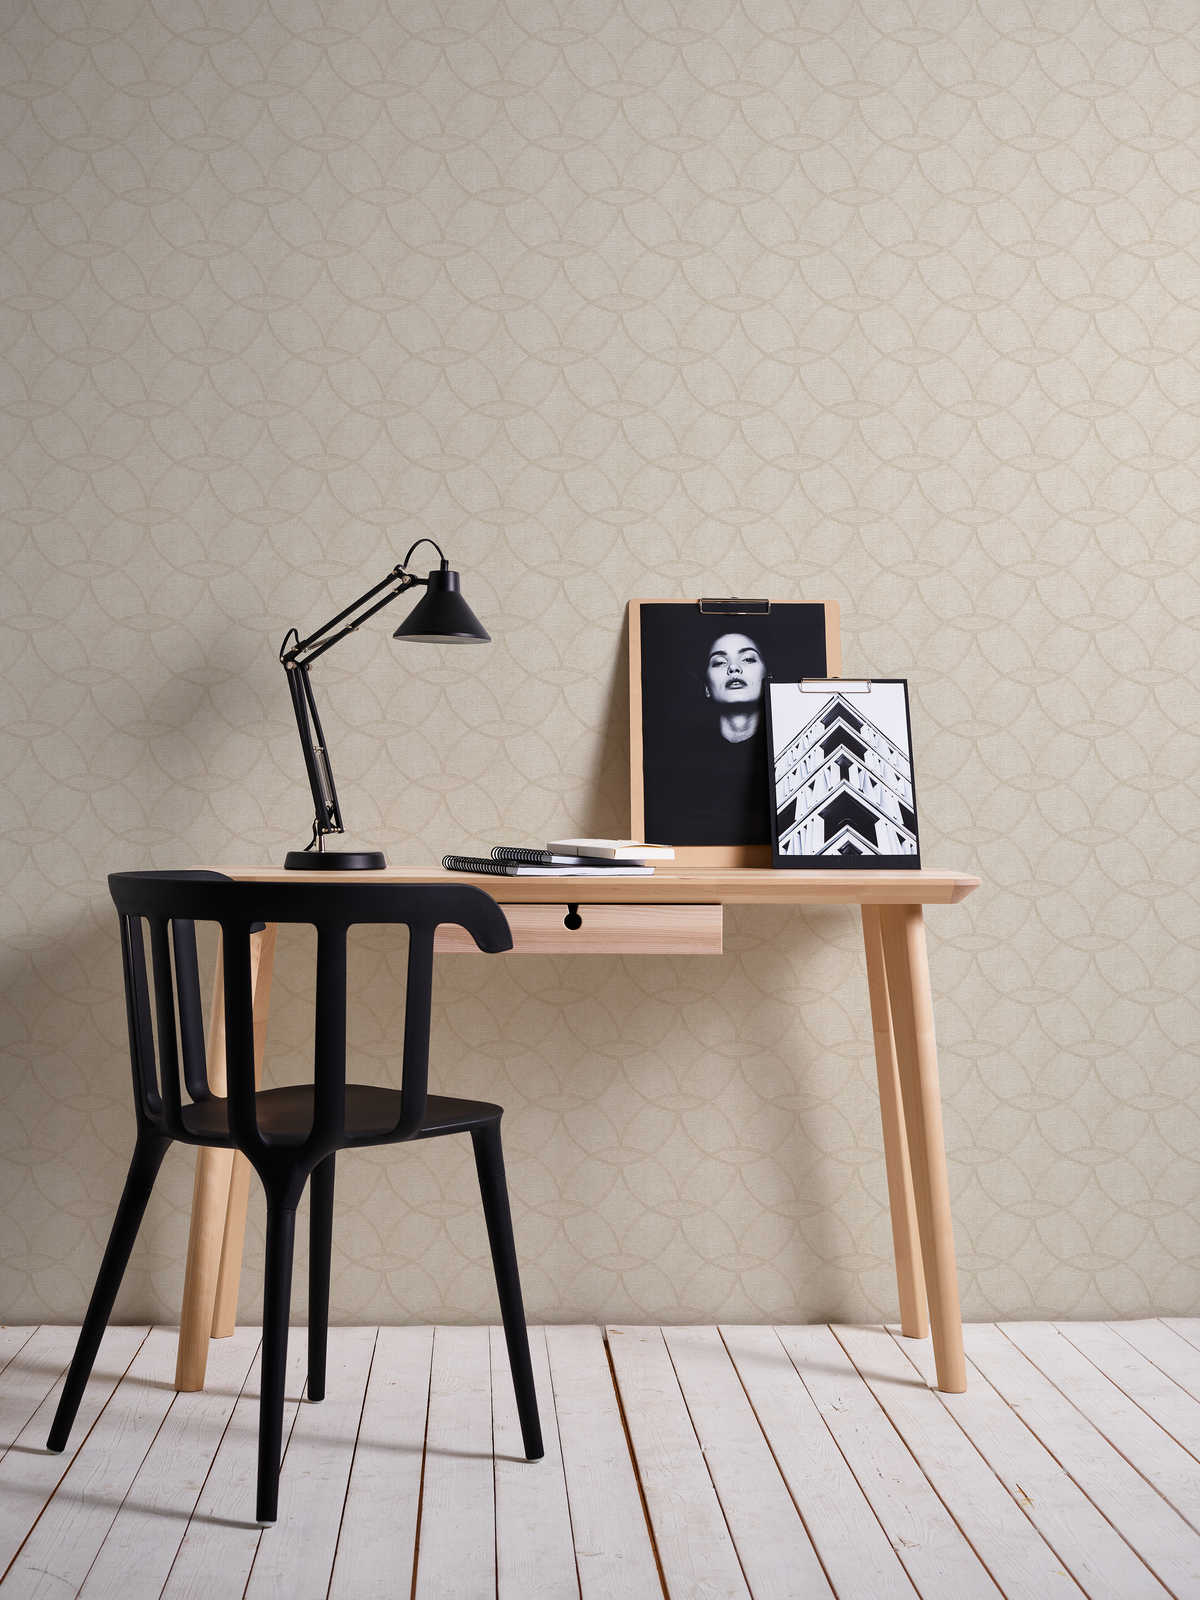             Retro wallpaper with geometric pattern with shine & shimmer effect - beige
        